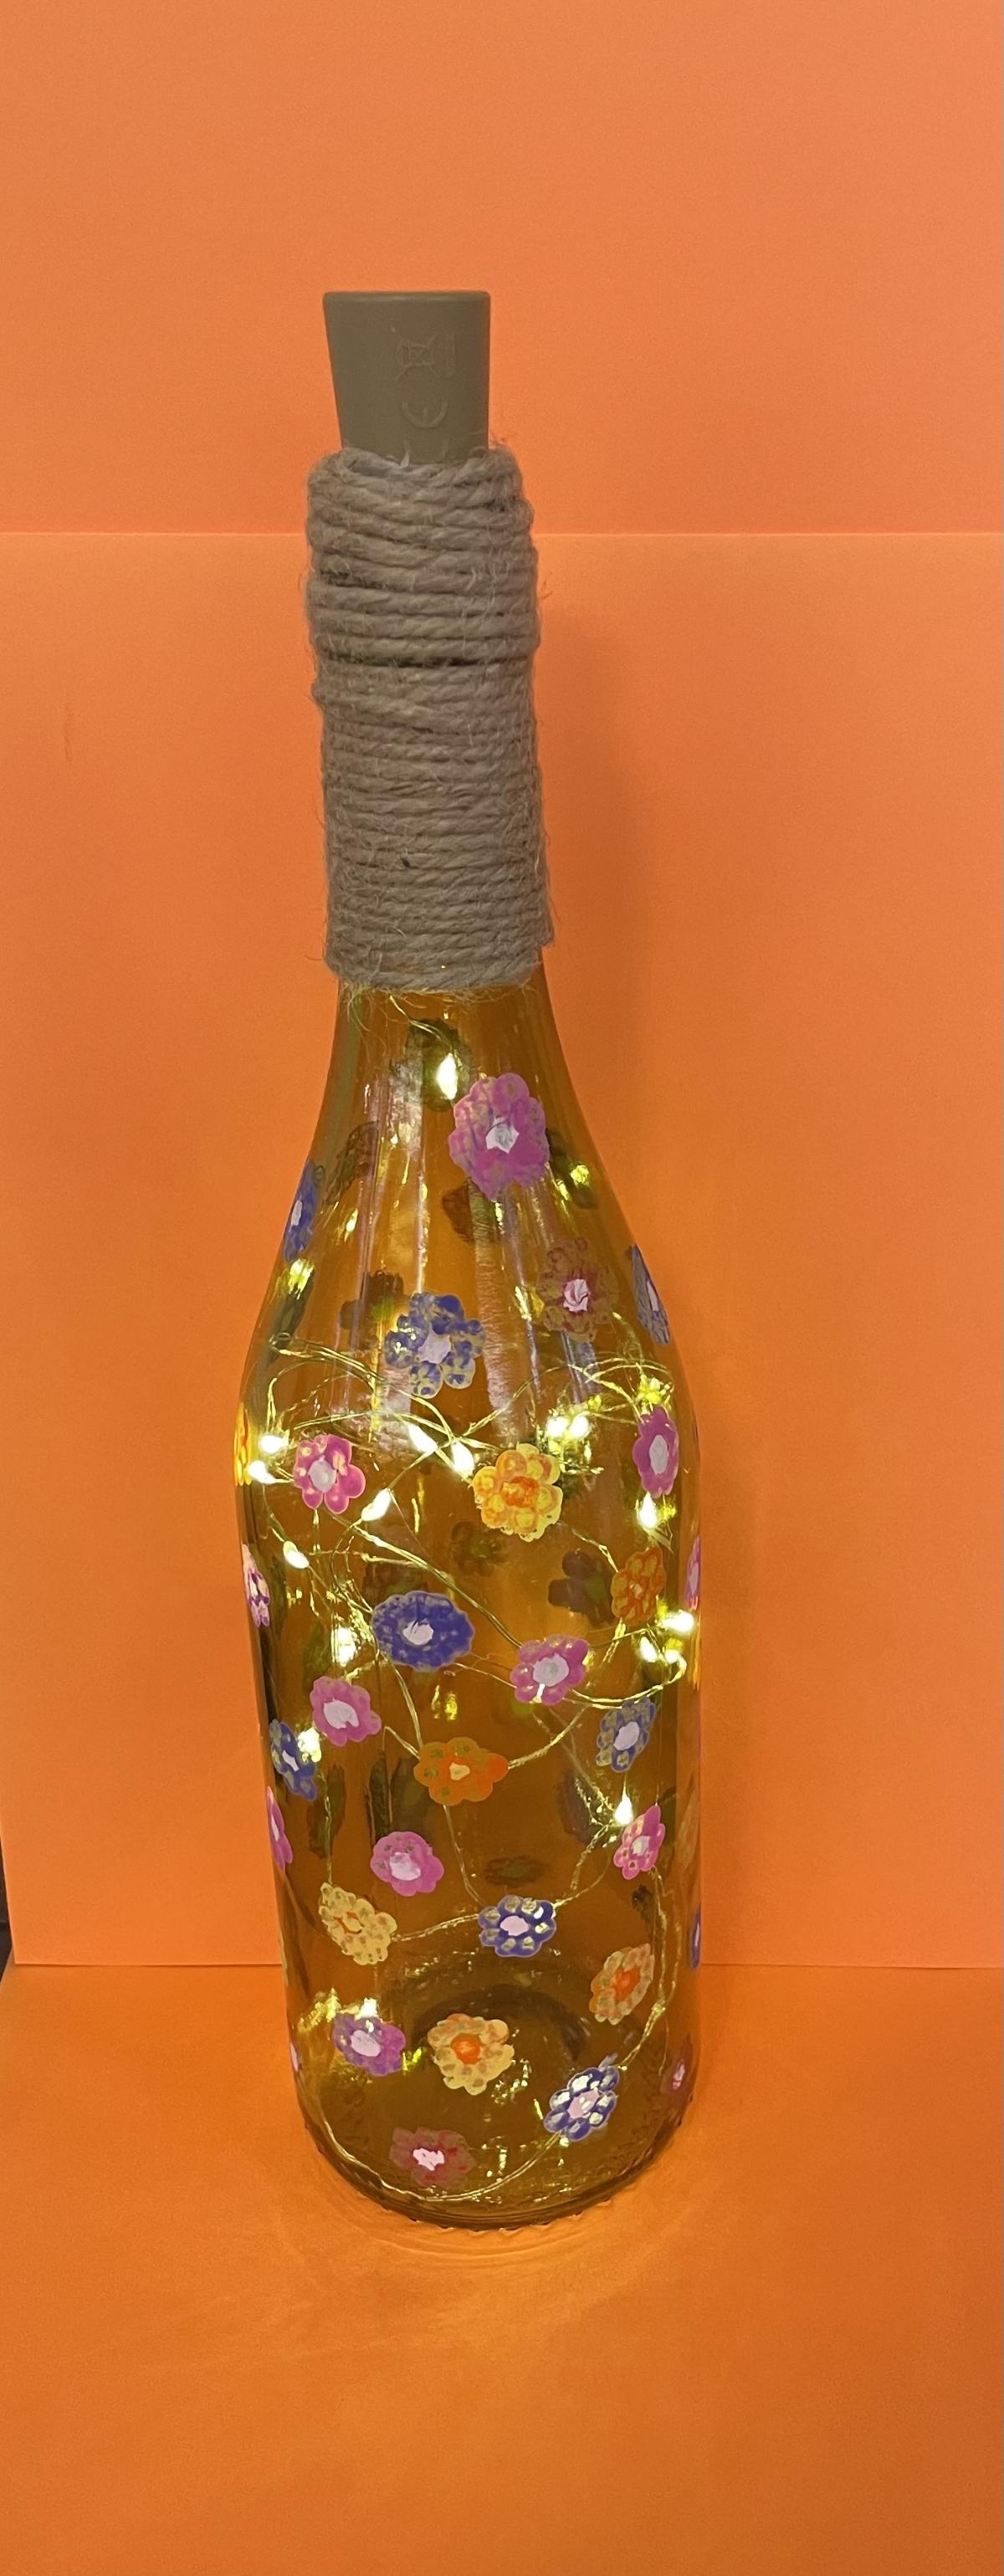 Painted glass bottle